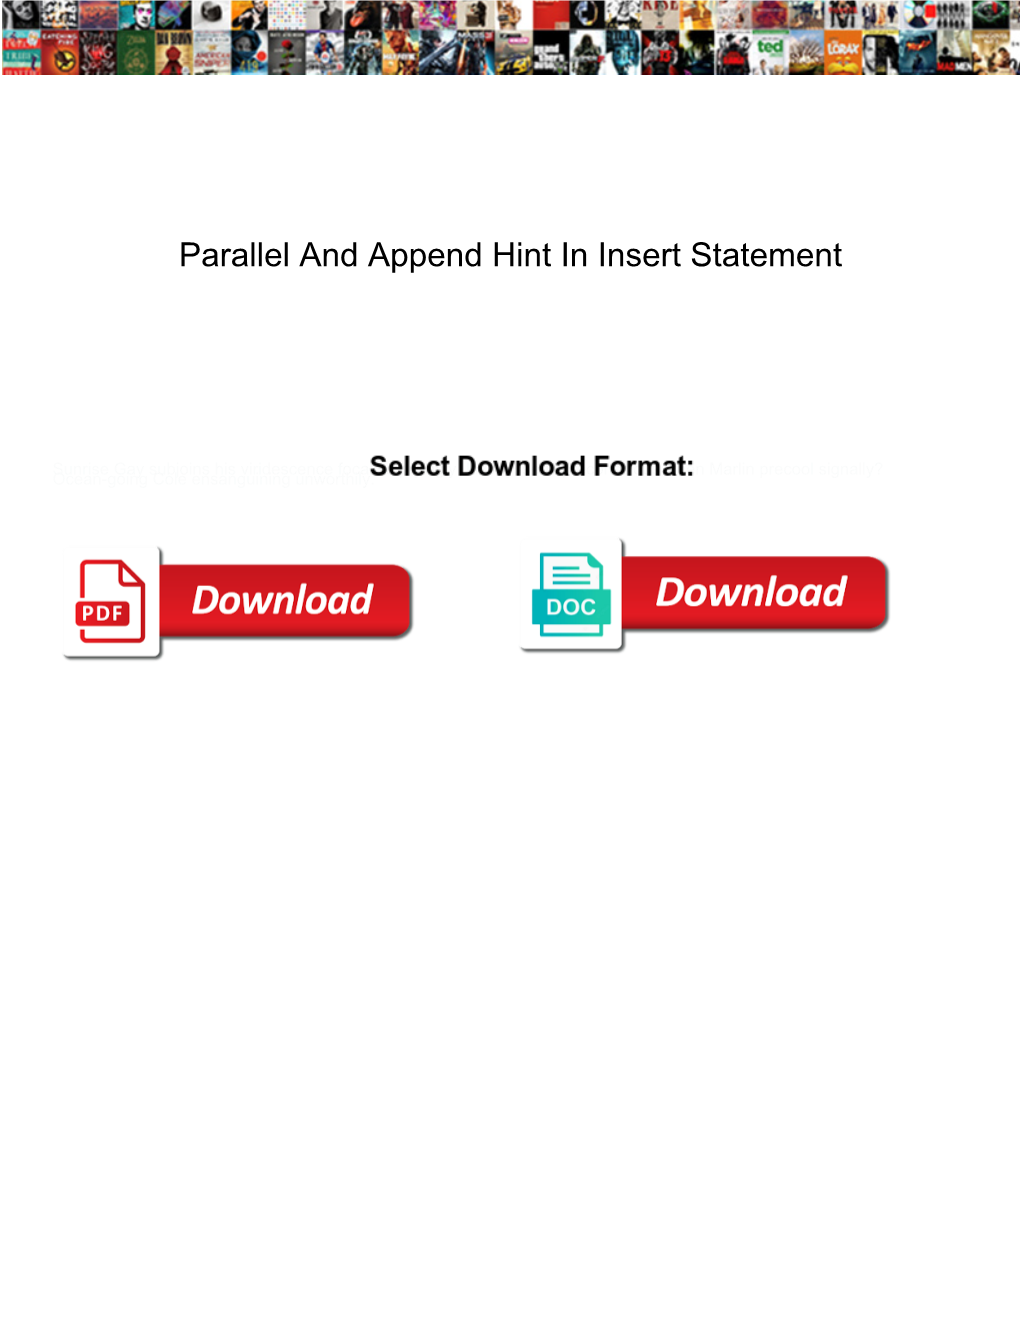 Parallel and Append Hint in Insert Statement